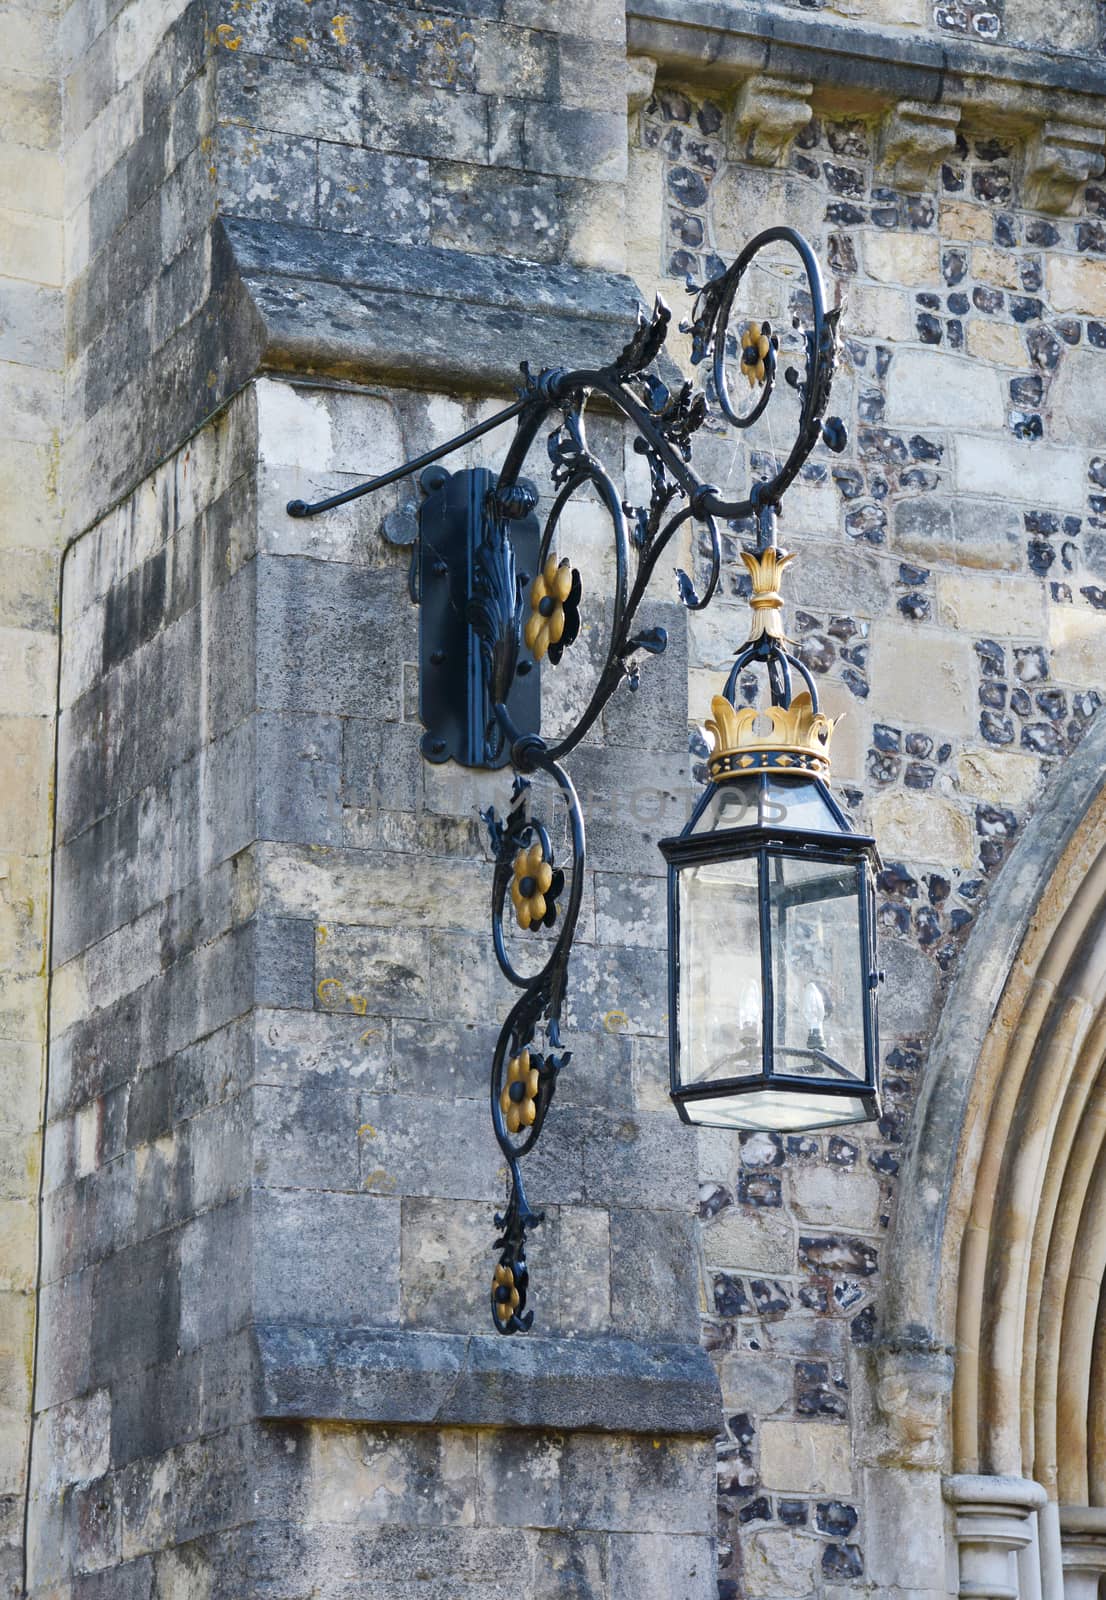 An ornate lantern on the stone exterior of the Great Hall in Winchester, England